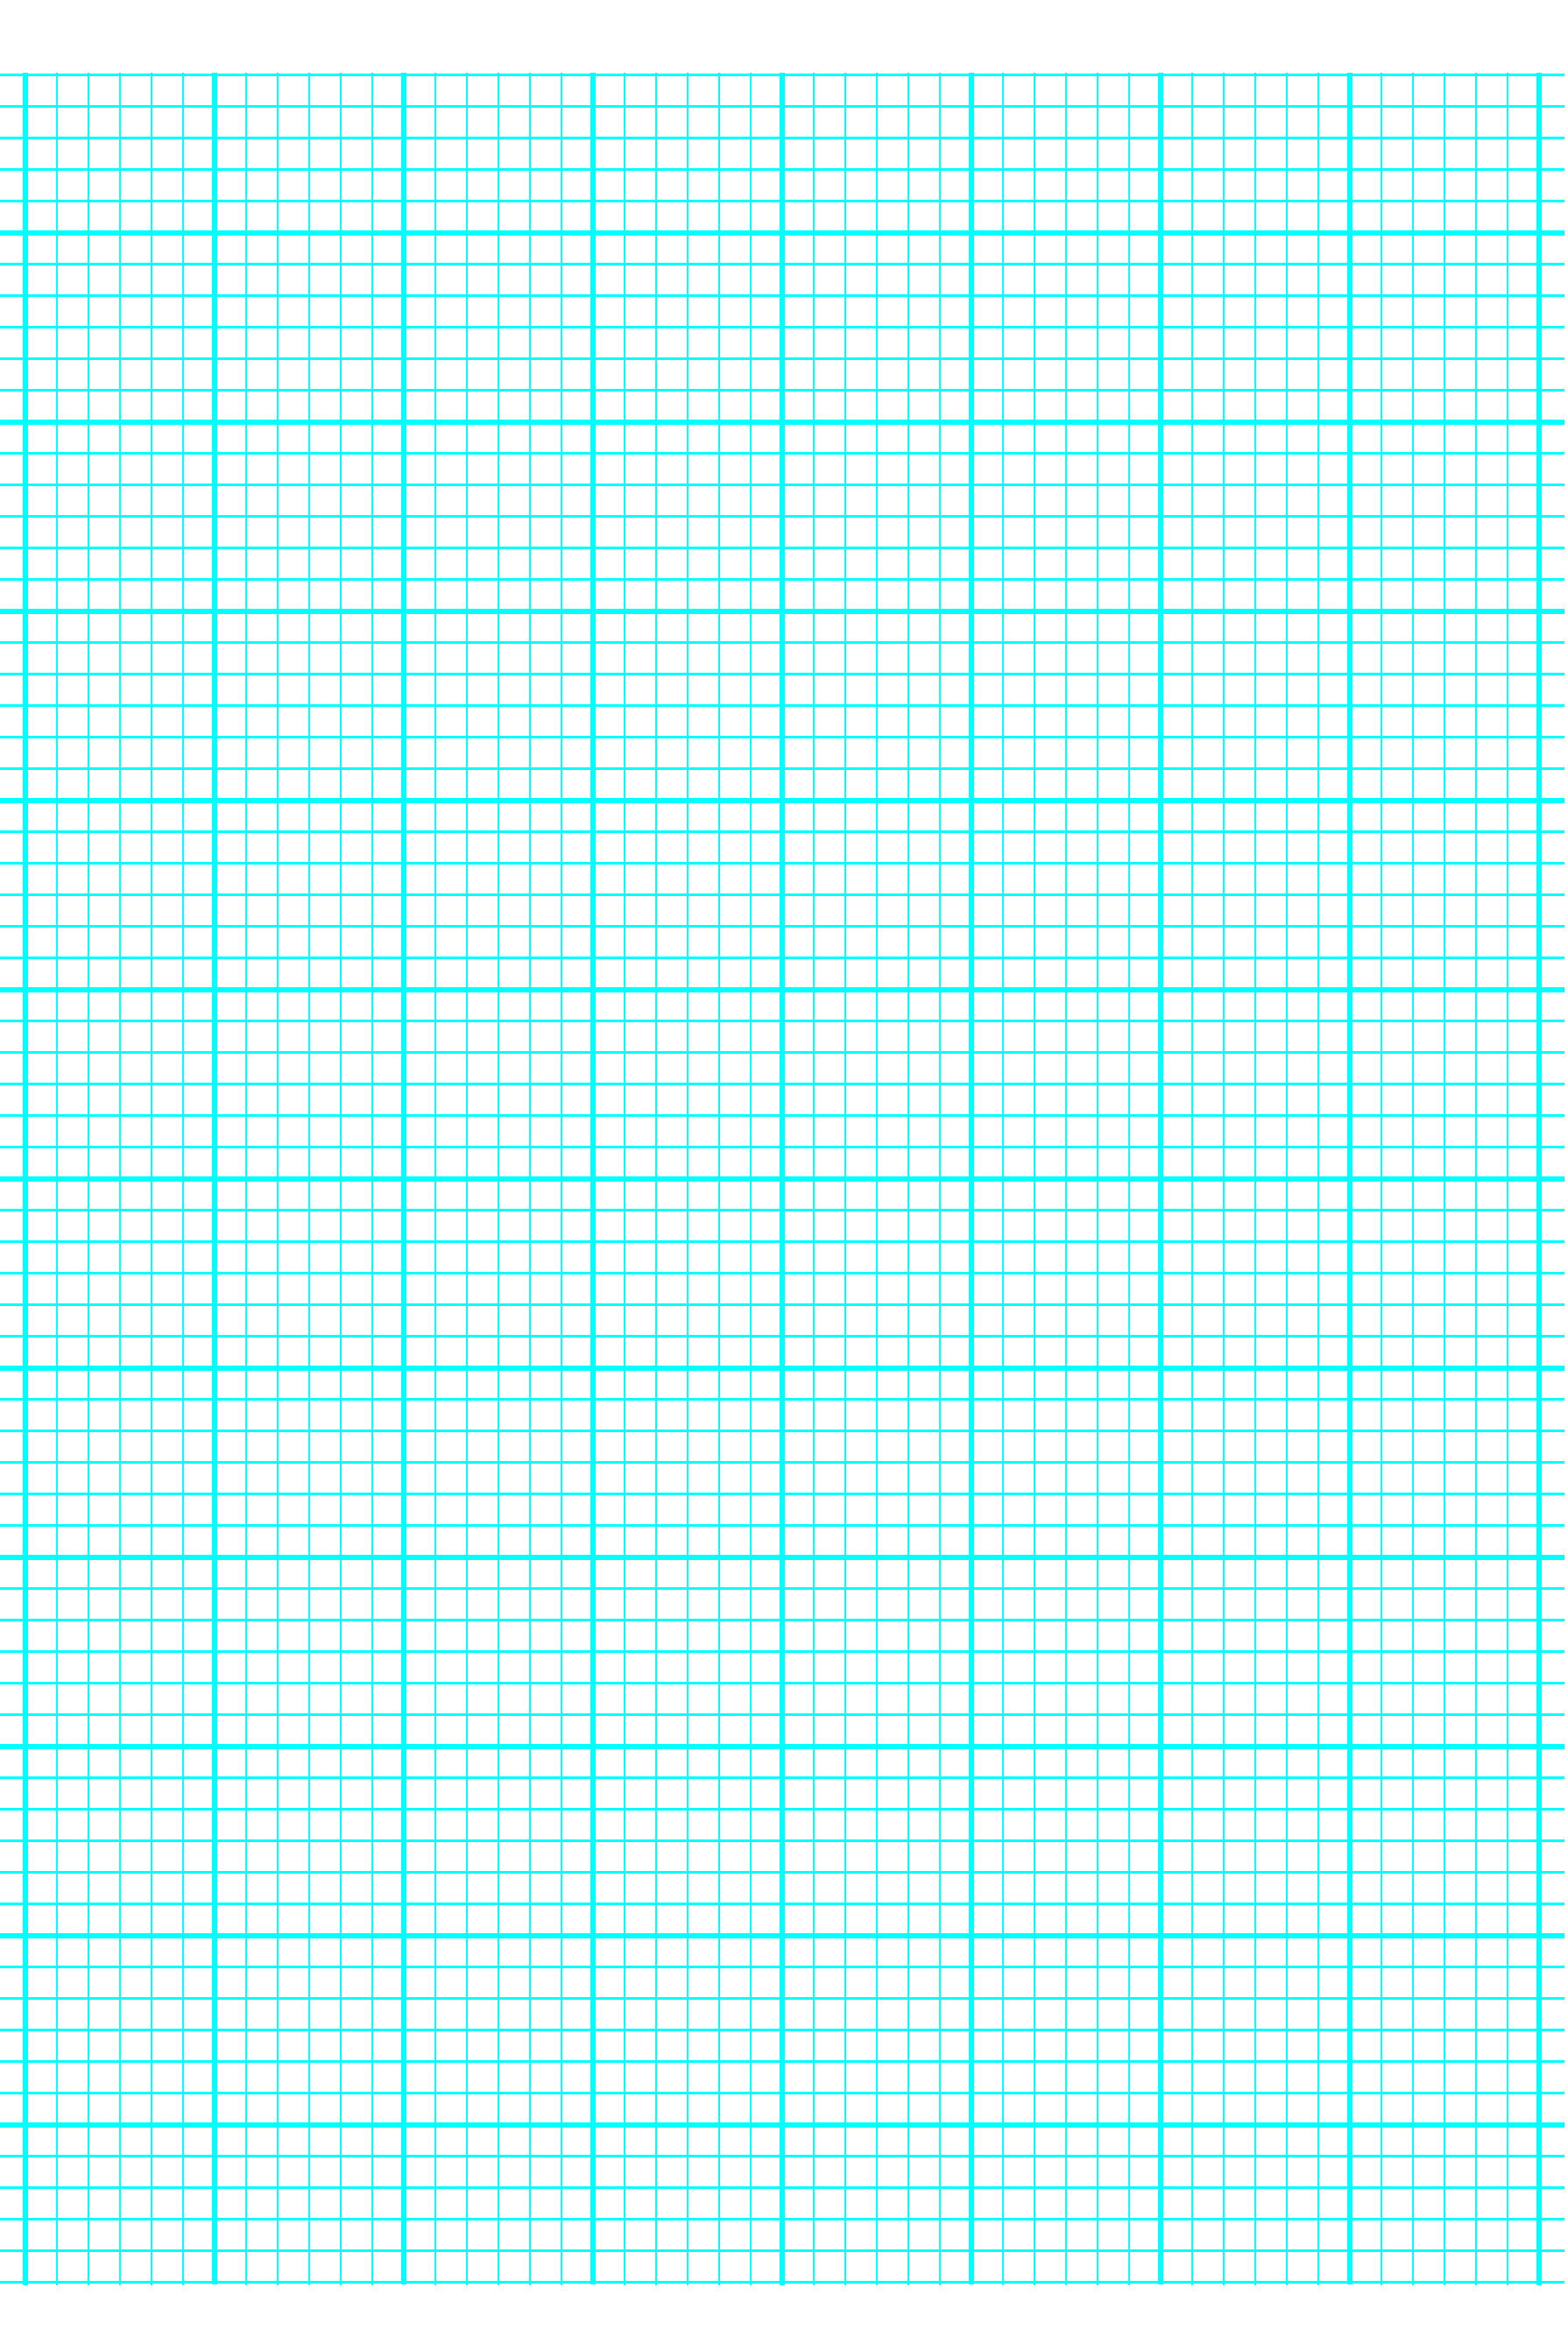 6 Lines Per Inch Graph Paper On A4 sized Paper Heavy Free Download